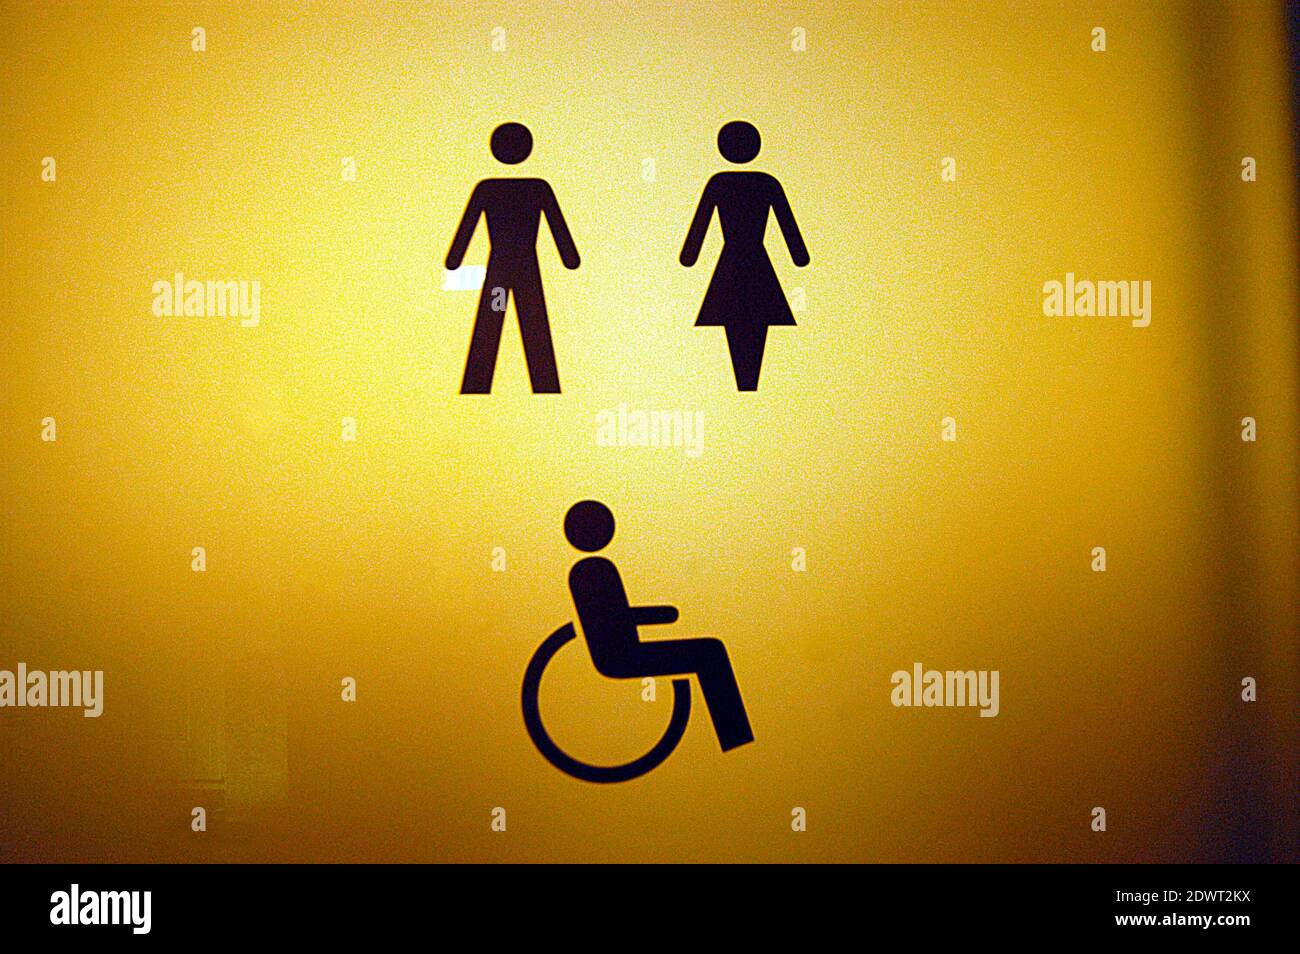 a toilet or WC sign for a public restroom, body hygiene and basic needs Stock Photo